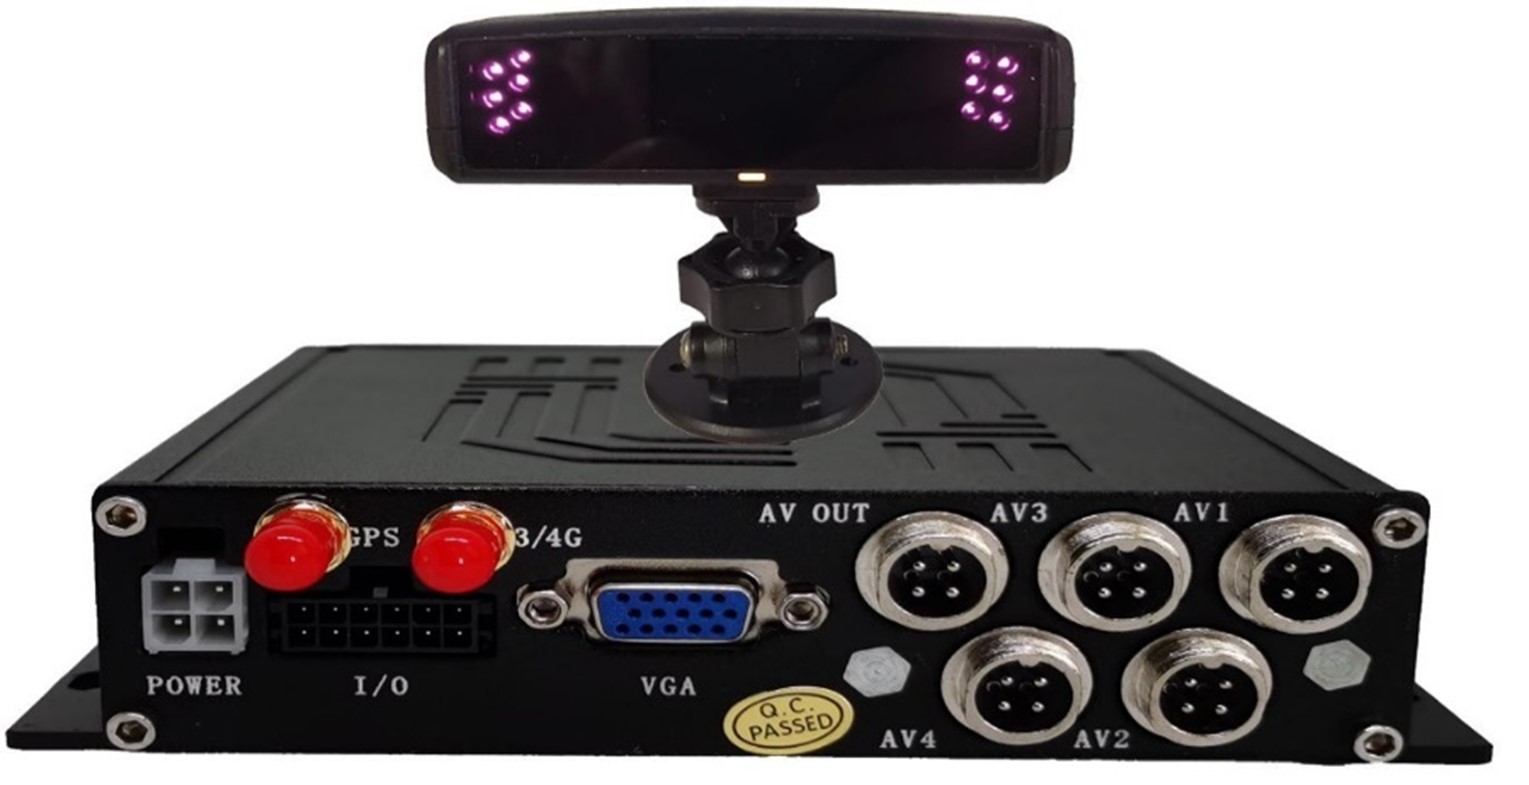 Driver Fatigue Monitoring System Model: AC-21-DFMS